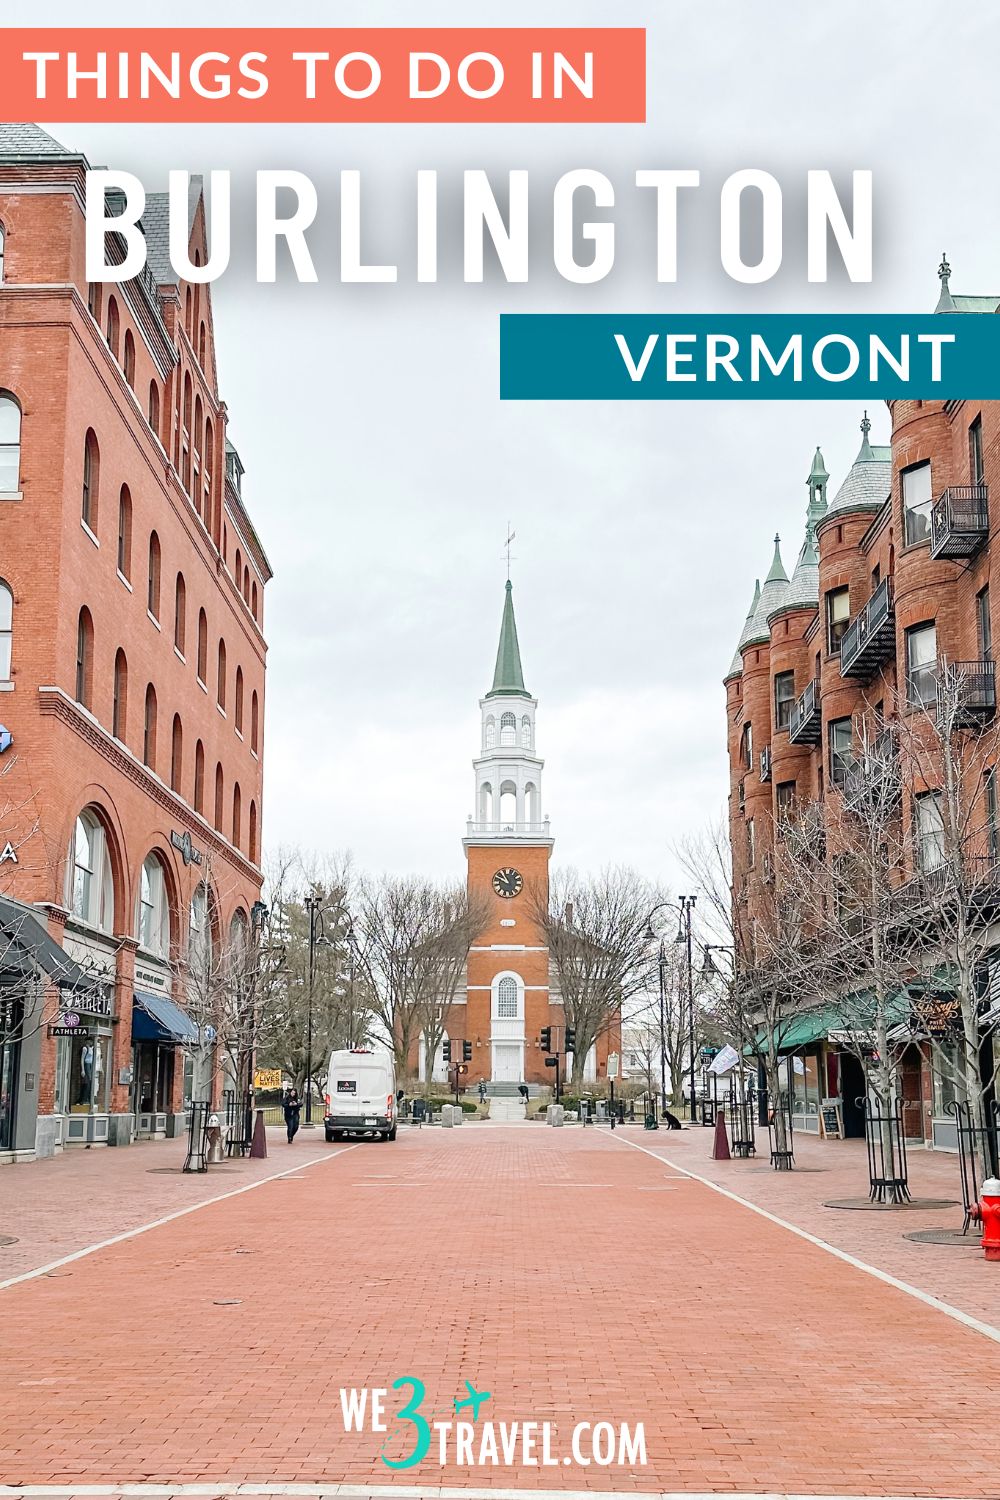 Discover the best things to do in in Burlington VT (for every season) from craft beer to lakefront fun and family-friendly attractions. Add a weekend getaway to Burlington Vermont to your New England vacation plans.